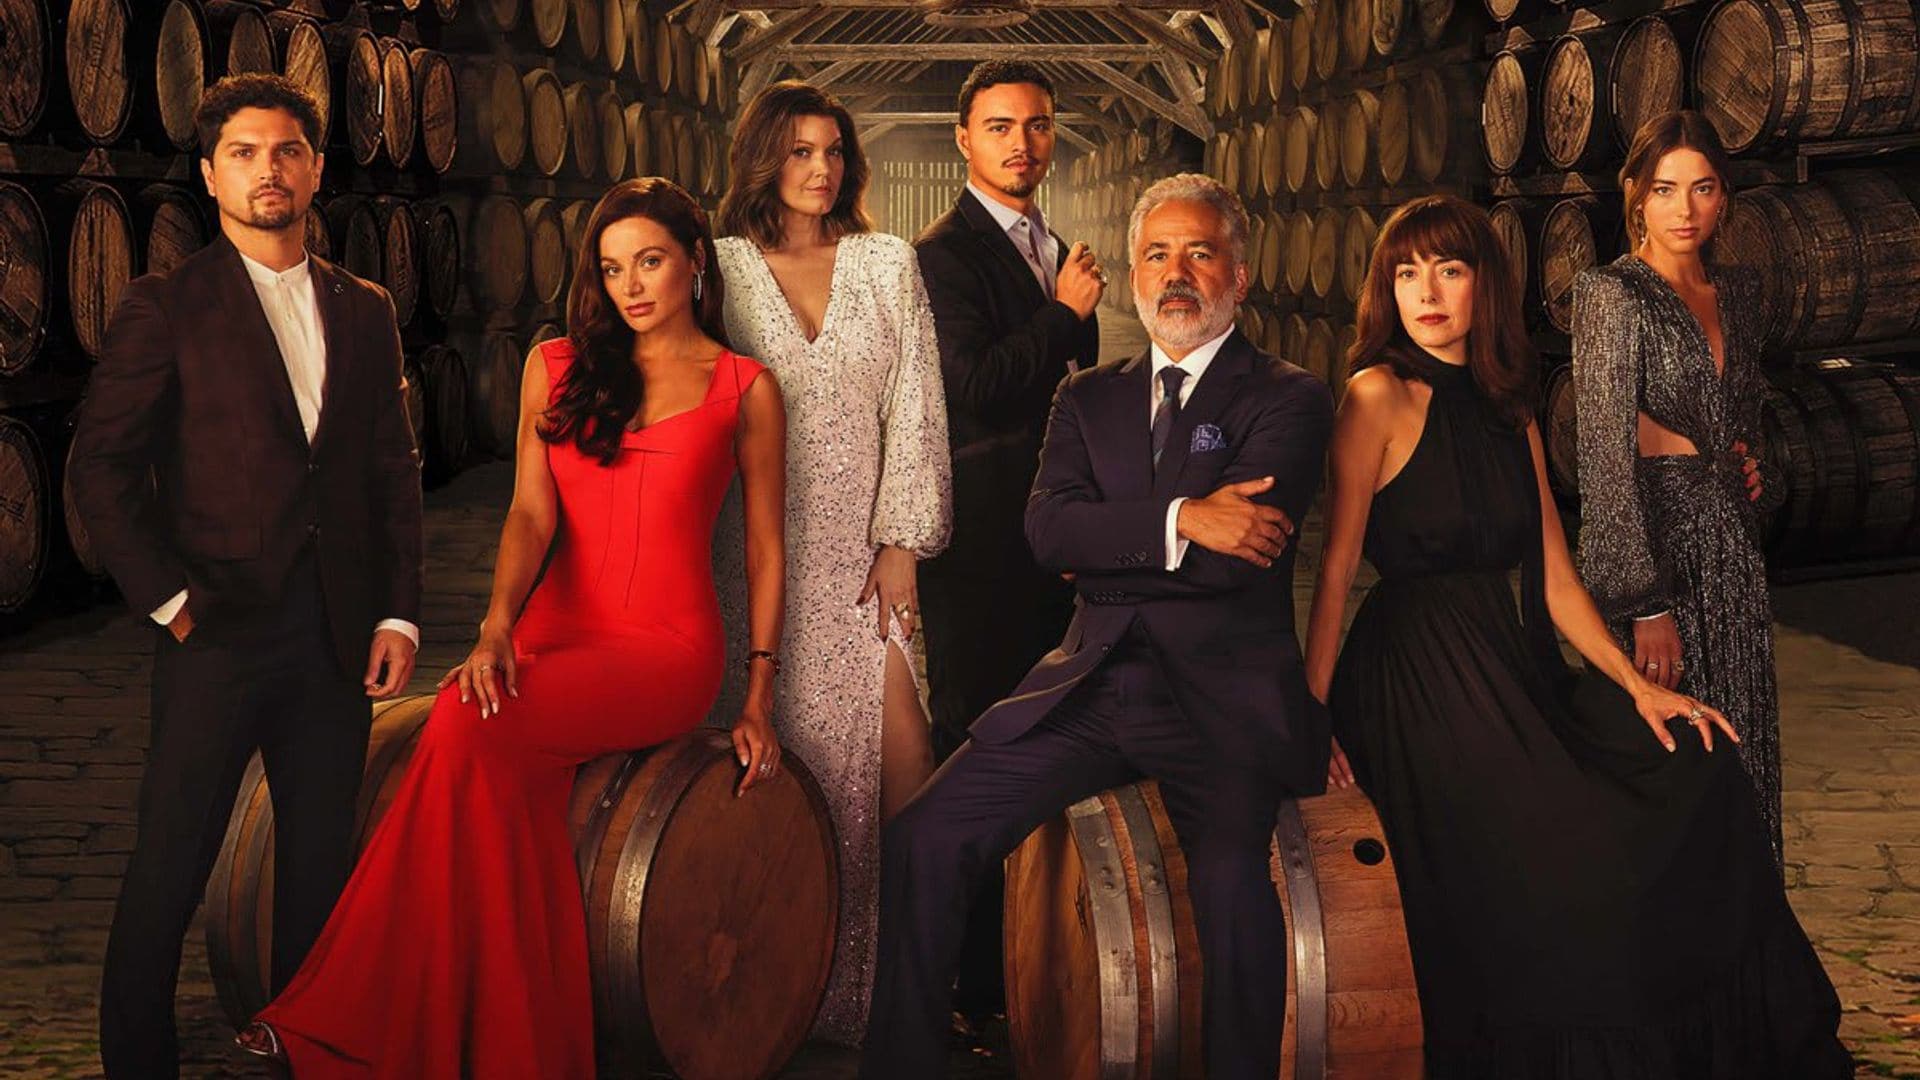 When to watch ABC’s Latinx upcoming drama ‘Promised Land’